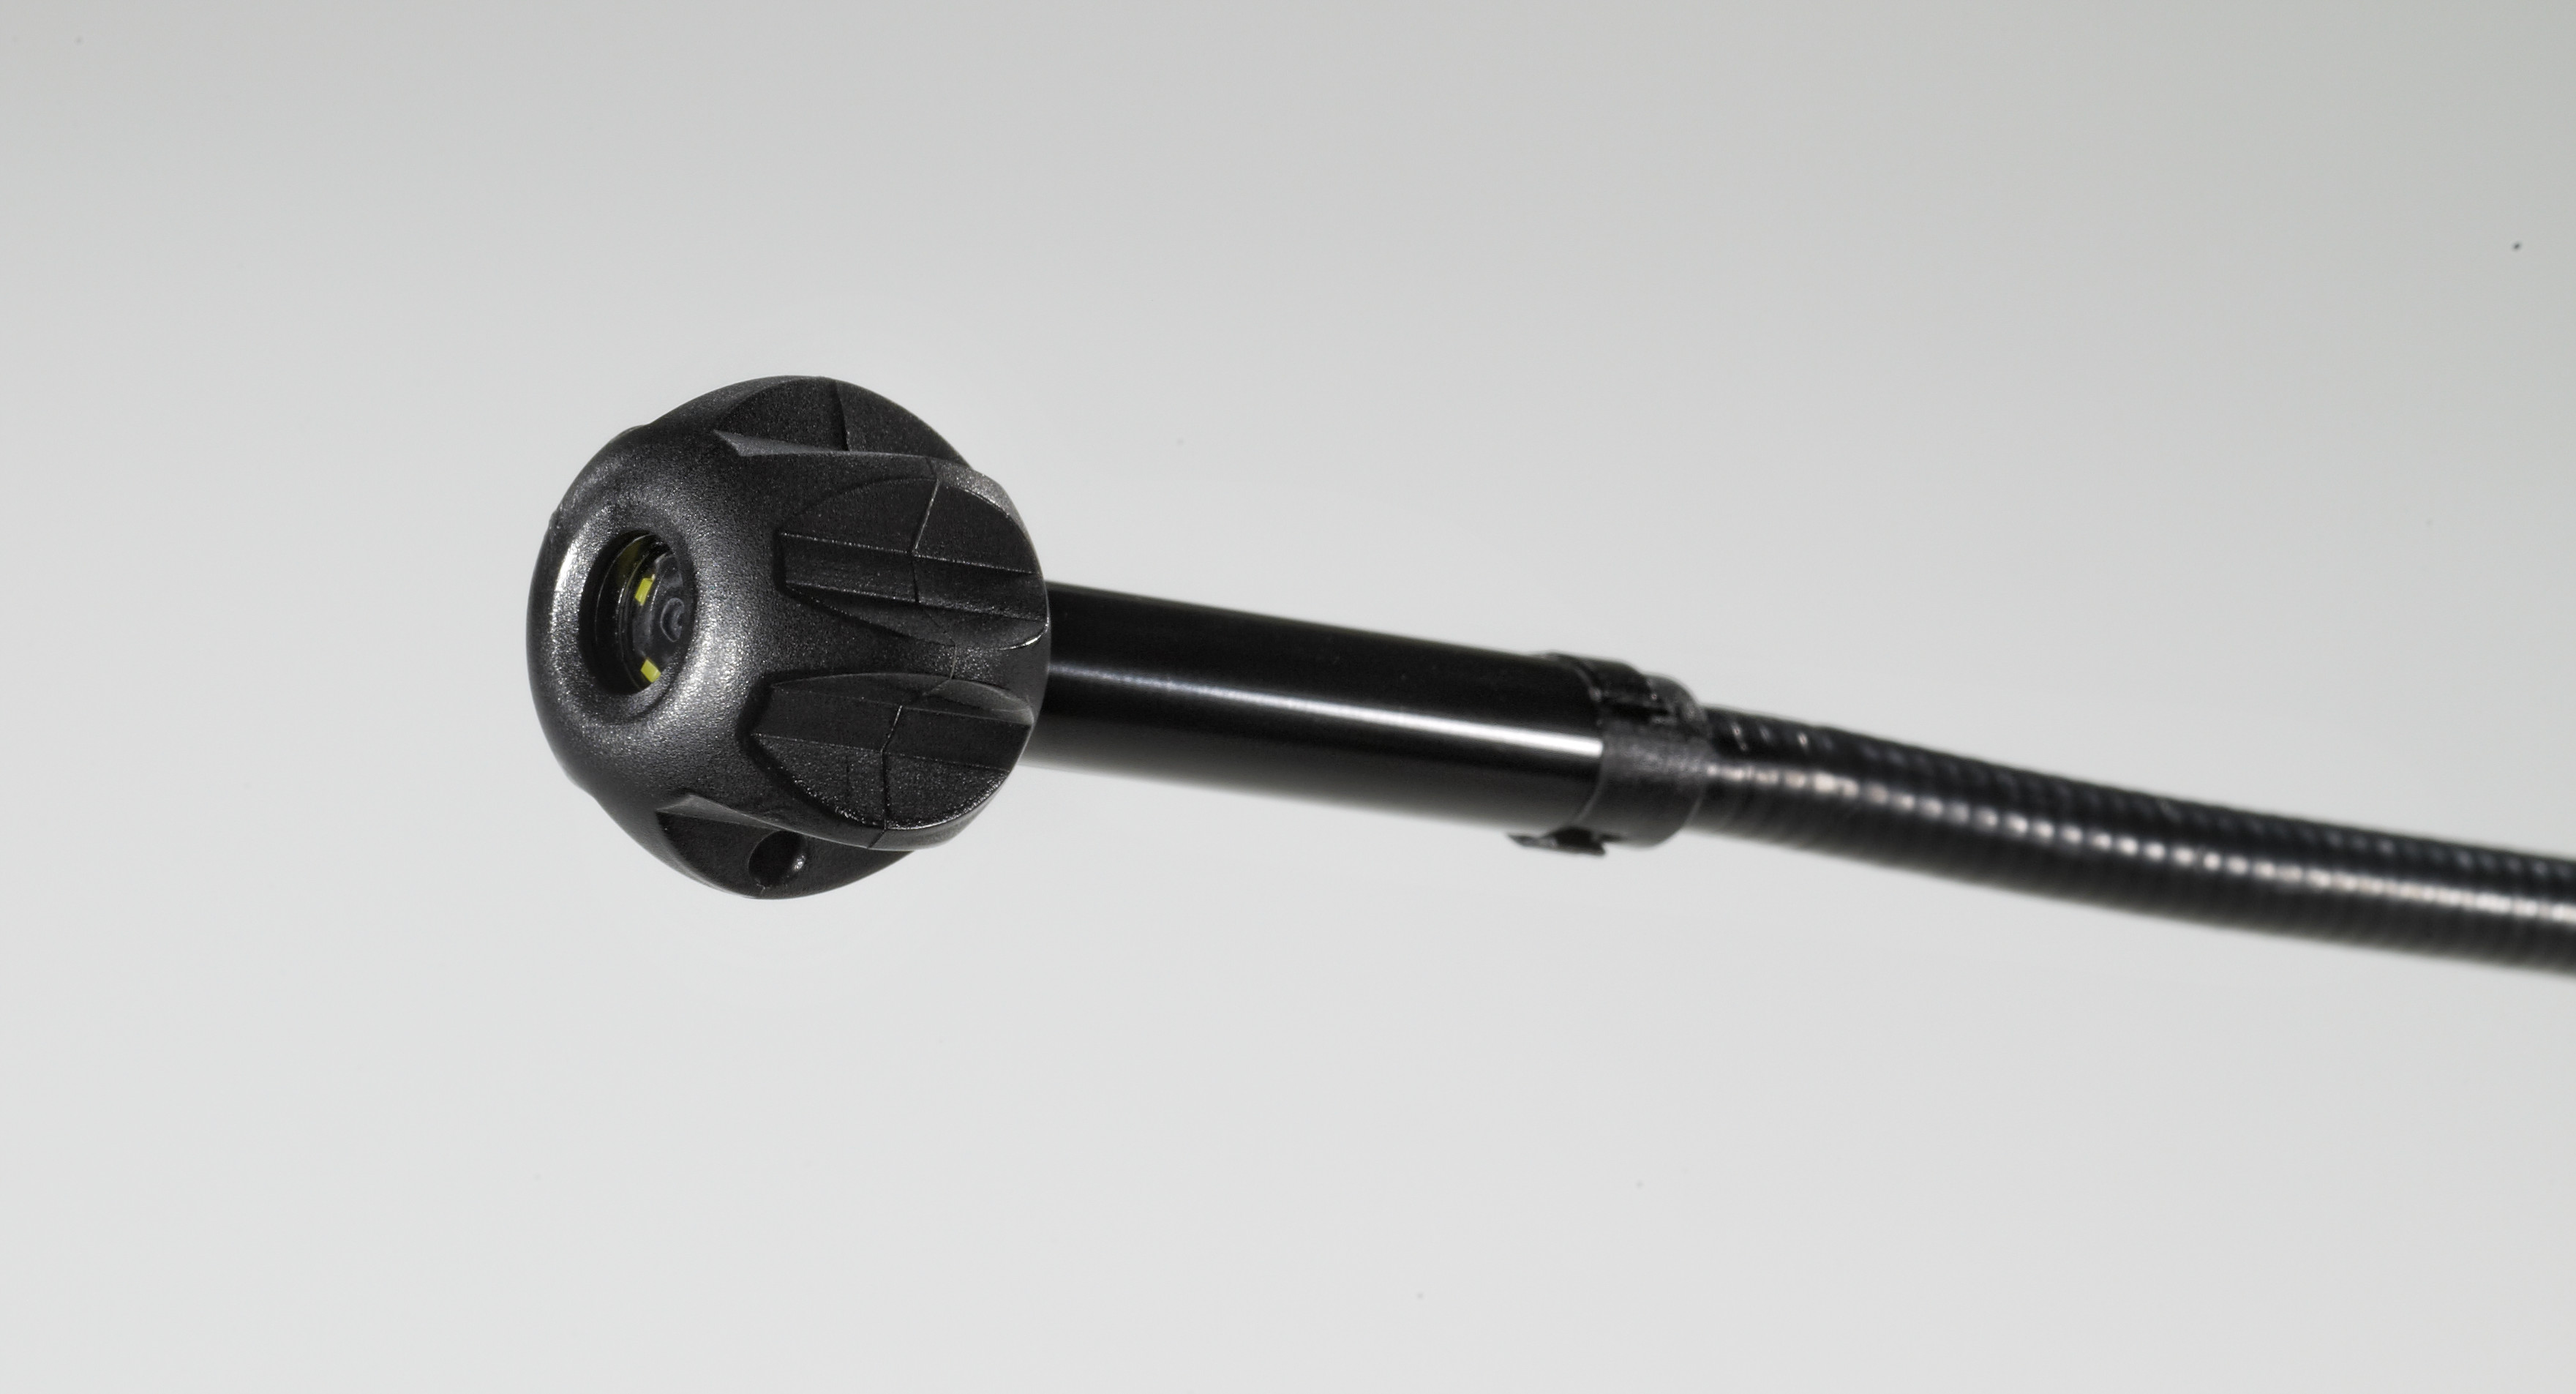 The M-Spector 360™ pipe guide attachment (48-53-0113) is designed specifically for plumbers frequently inspecting pipes. The 1 in. ball-shaped attachment reduces friction on the camera head allowing it to maneuver easily through PVC, copper and cast iron pipe. Its design also elevates the camera out of resting water and reduces potential for build-up. This attachment fits both M-Spector consoles and is included in the (2314-20) M-Spector 360™ rotating inspection camera kit.